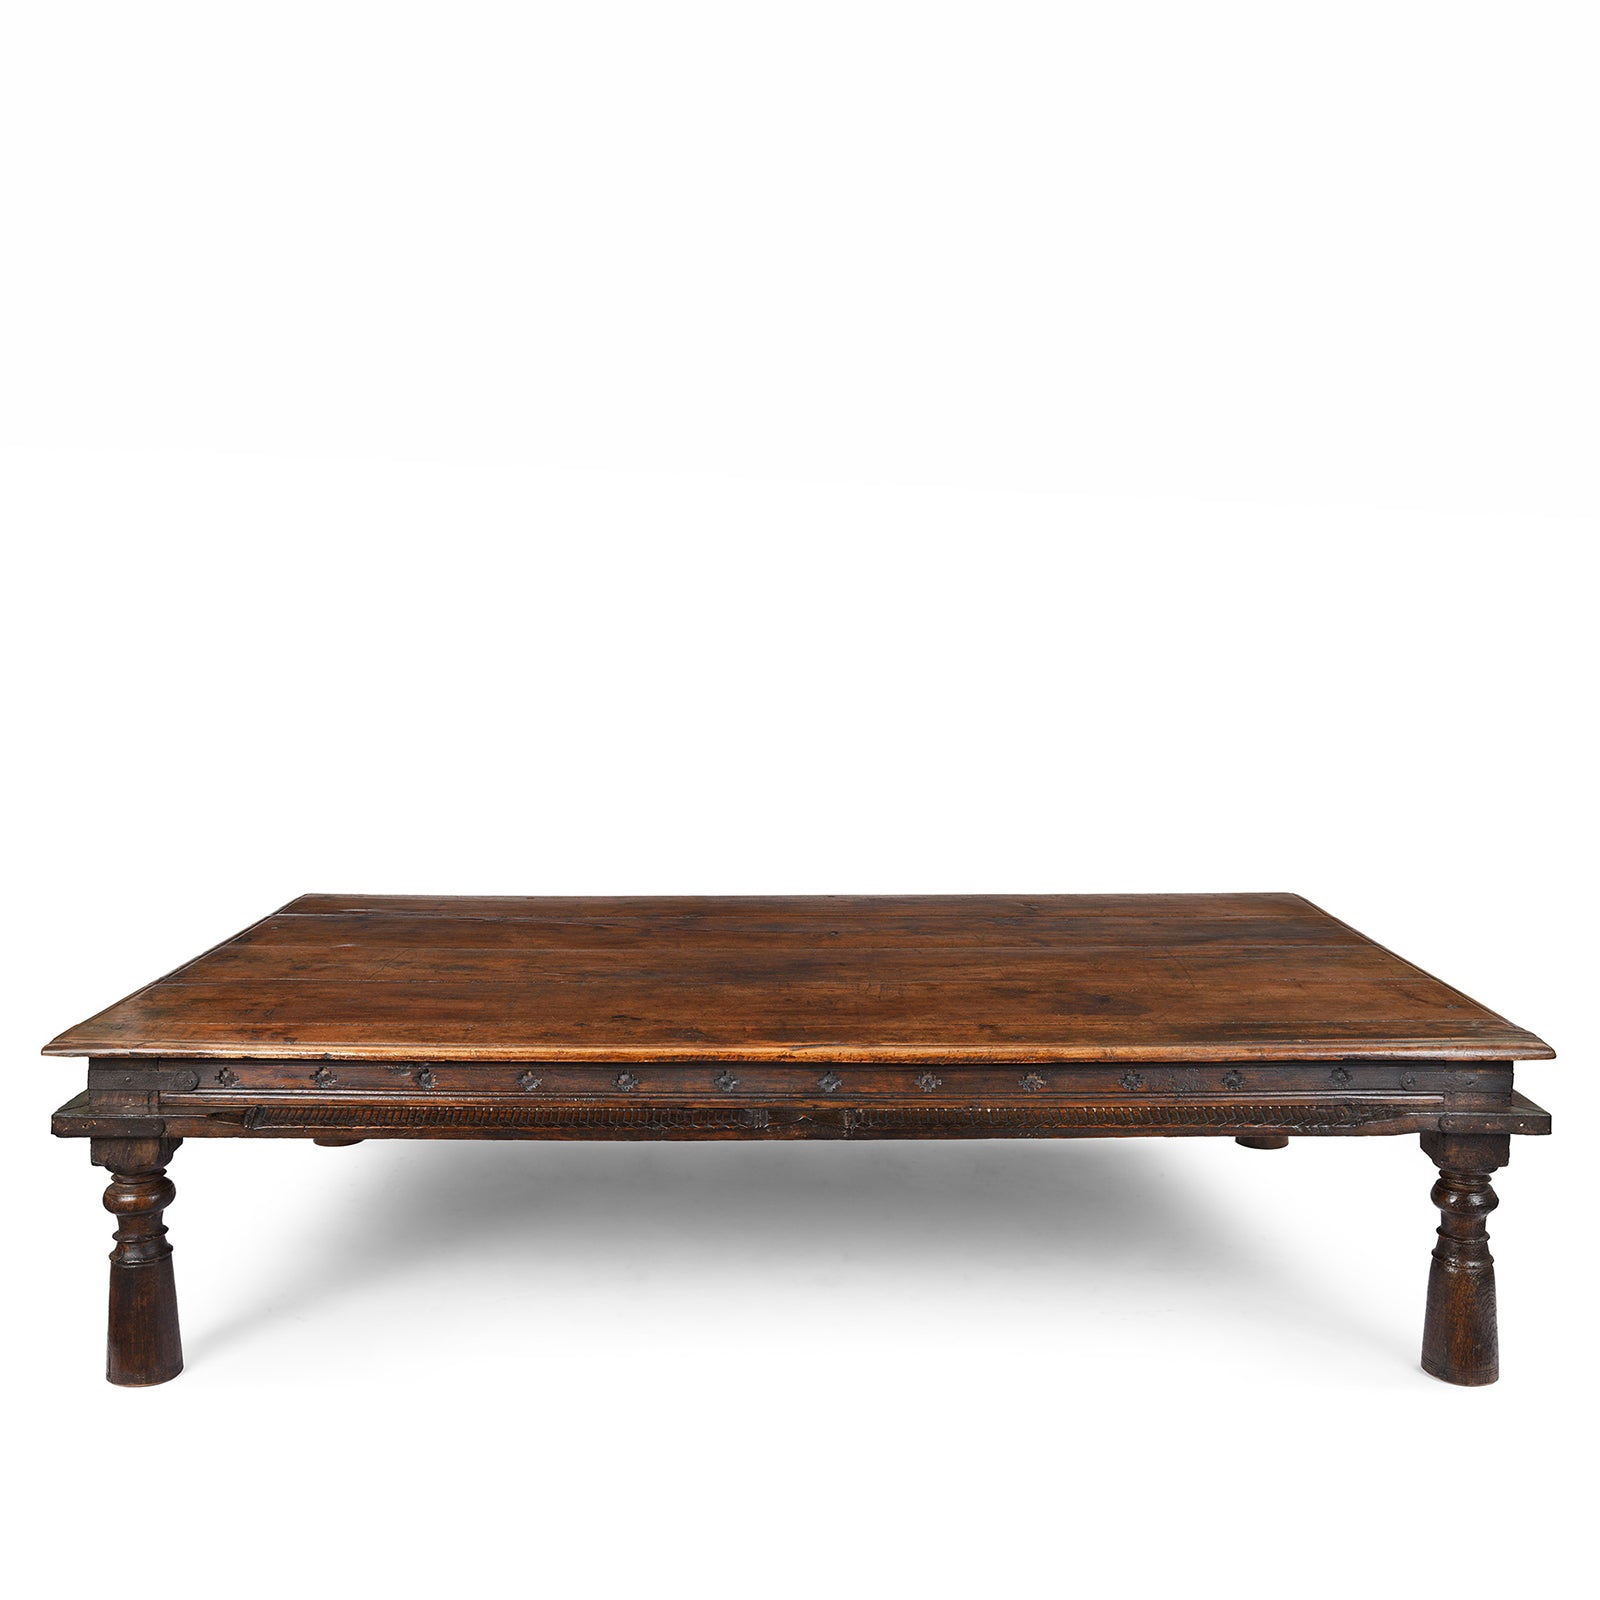 Antique Indian Takhat Coffee Table From Hyderabad | Indigo Antiques